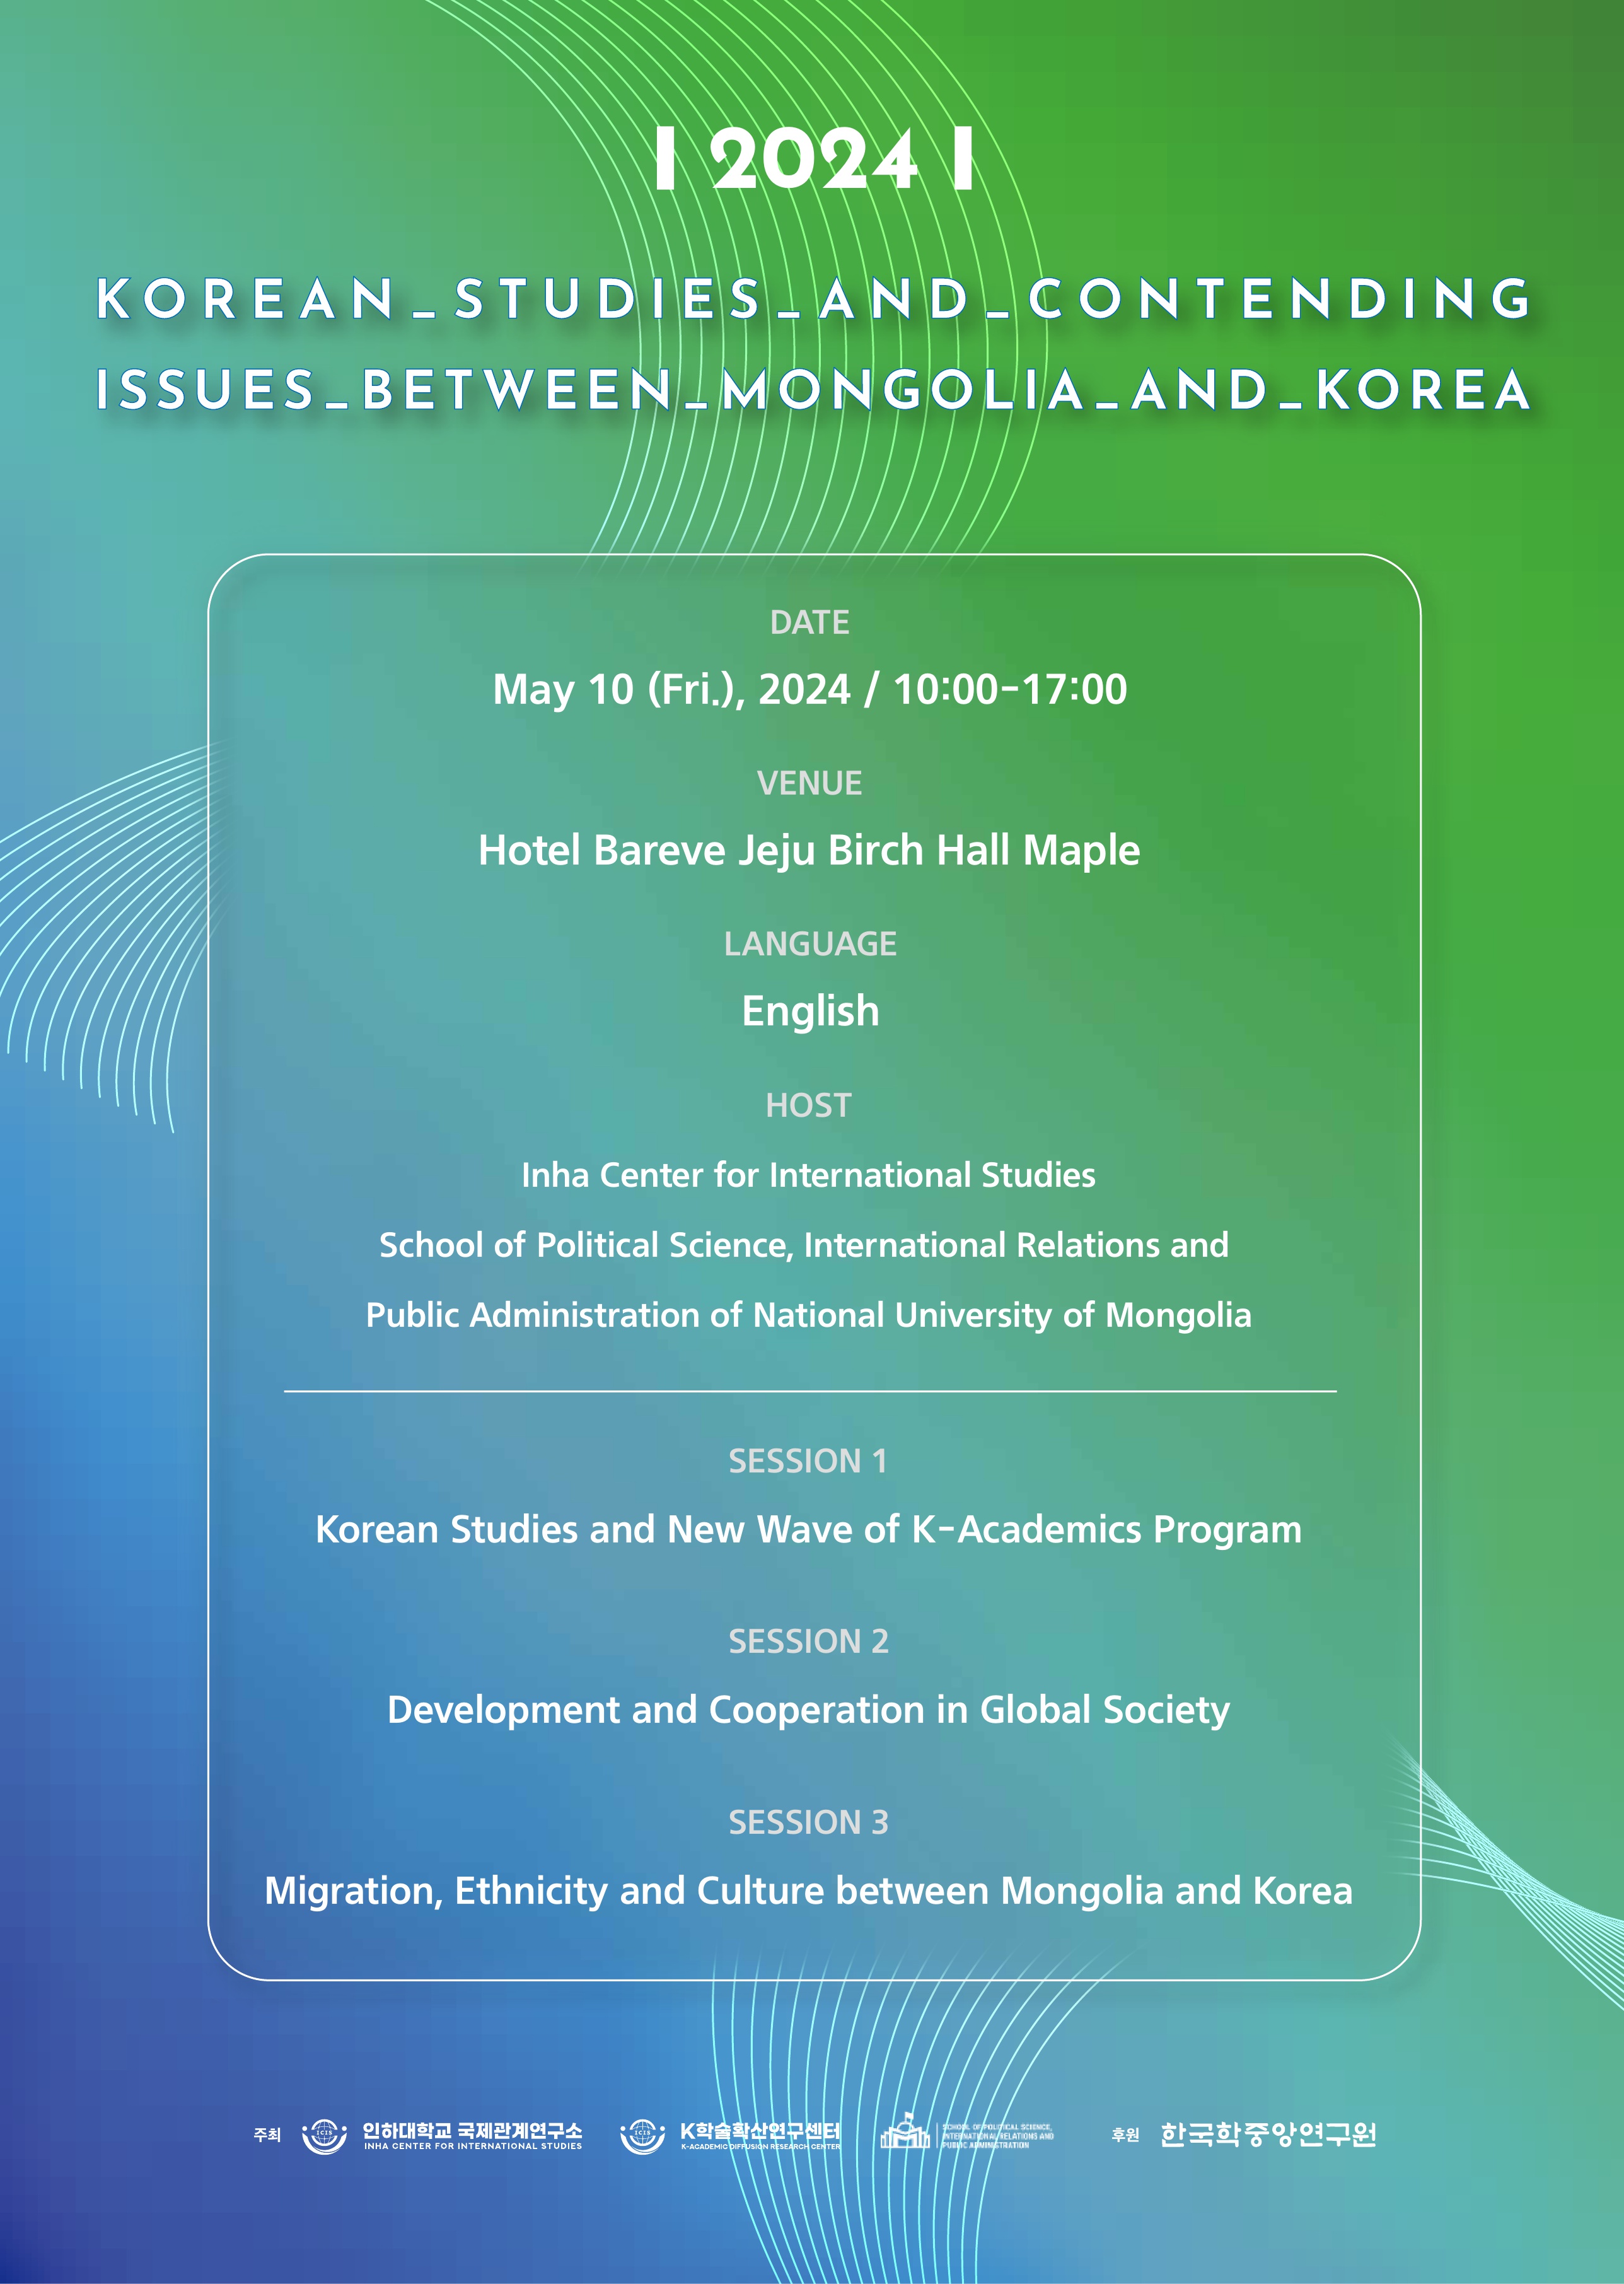 Korean Studies and Contending Issues Between Mongolia and Korea                                 썸네일